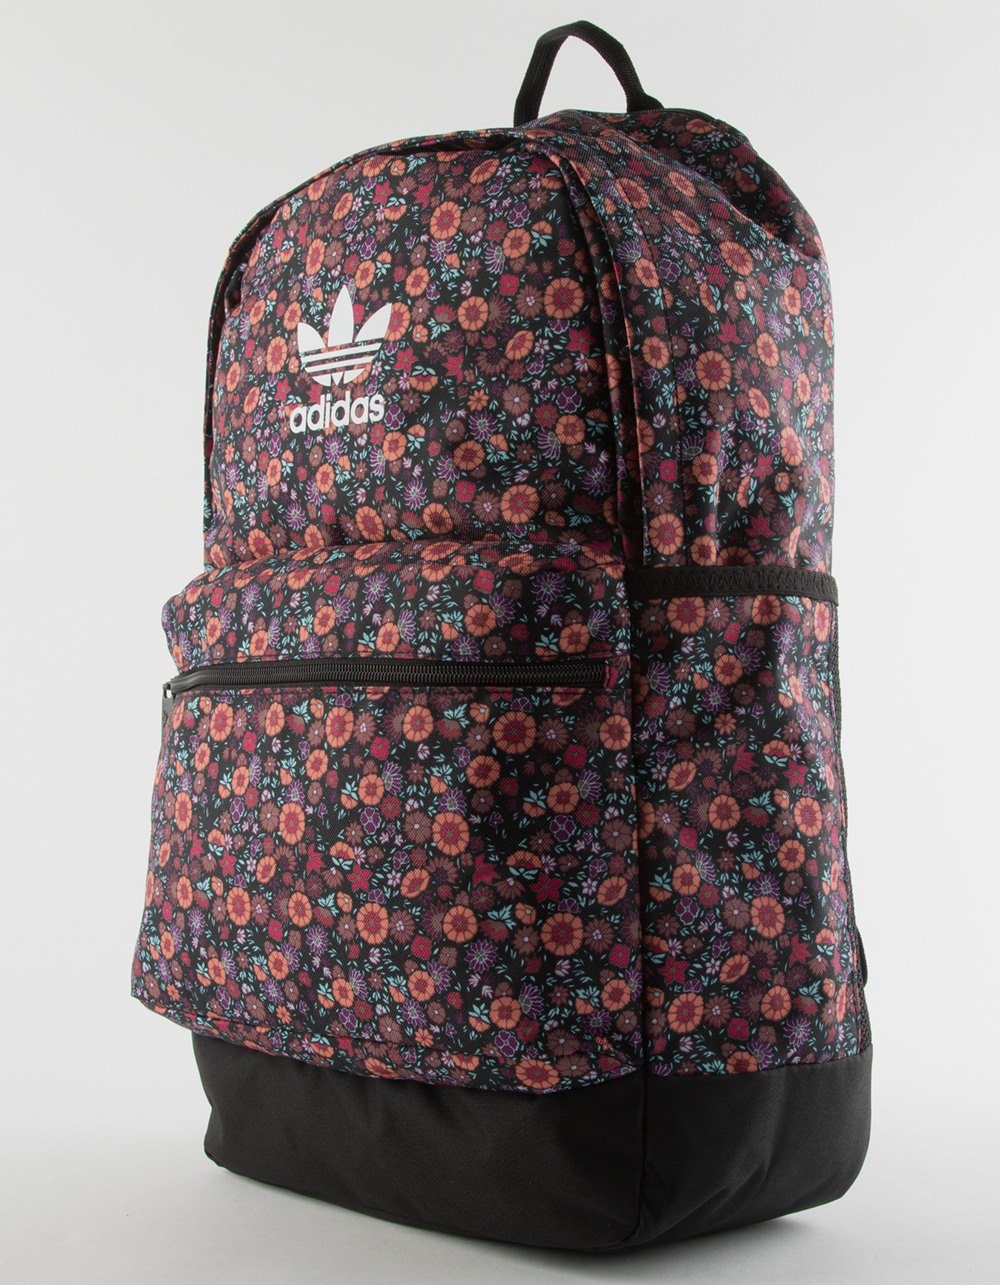 adidas Performance Classic Backpack Travel bag 385213